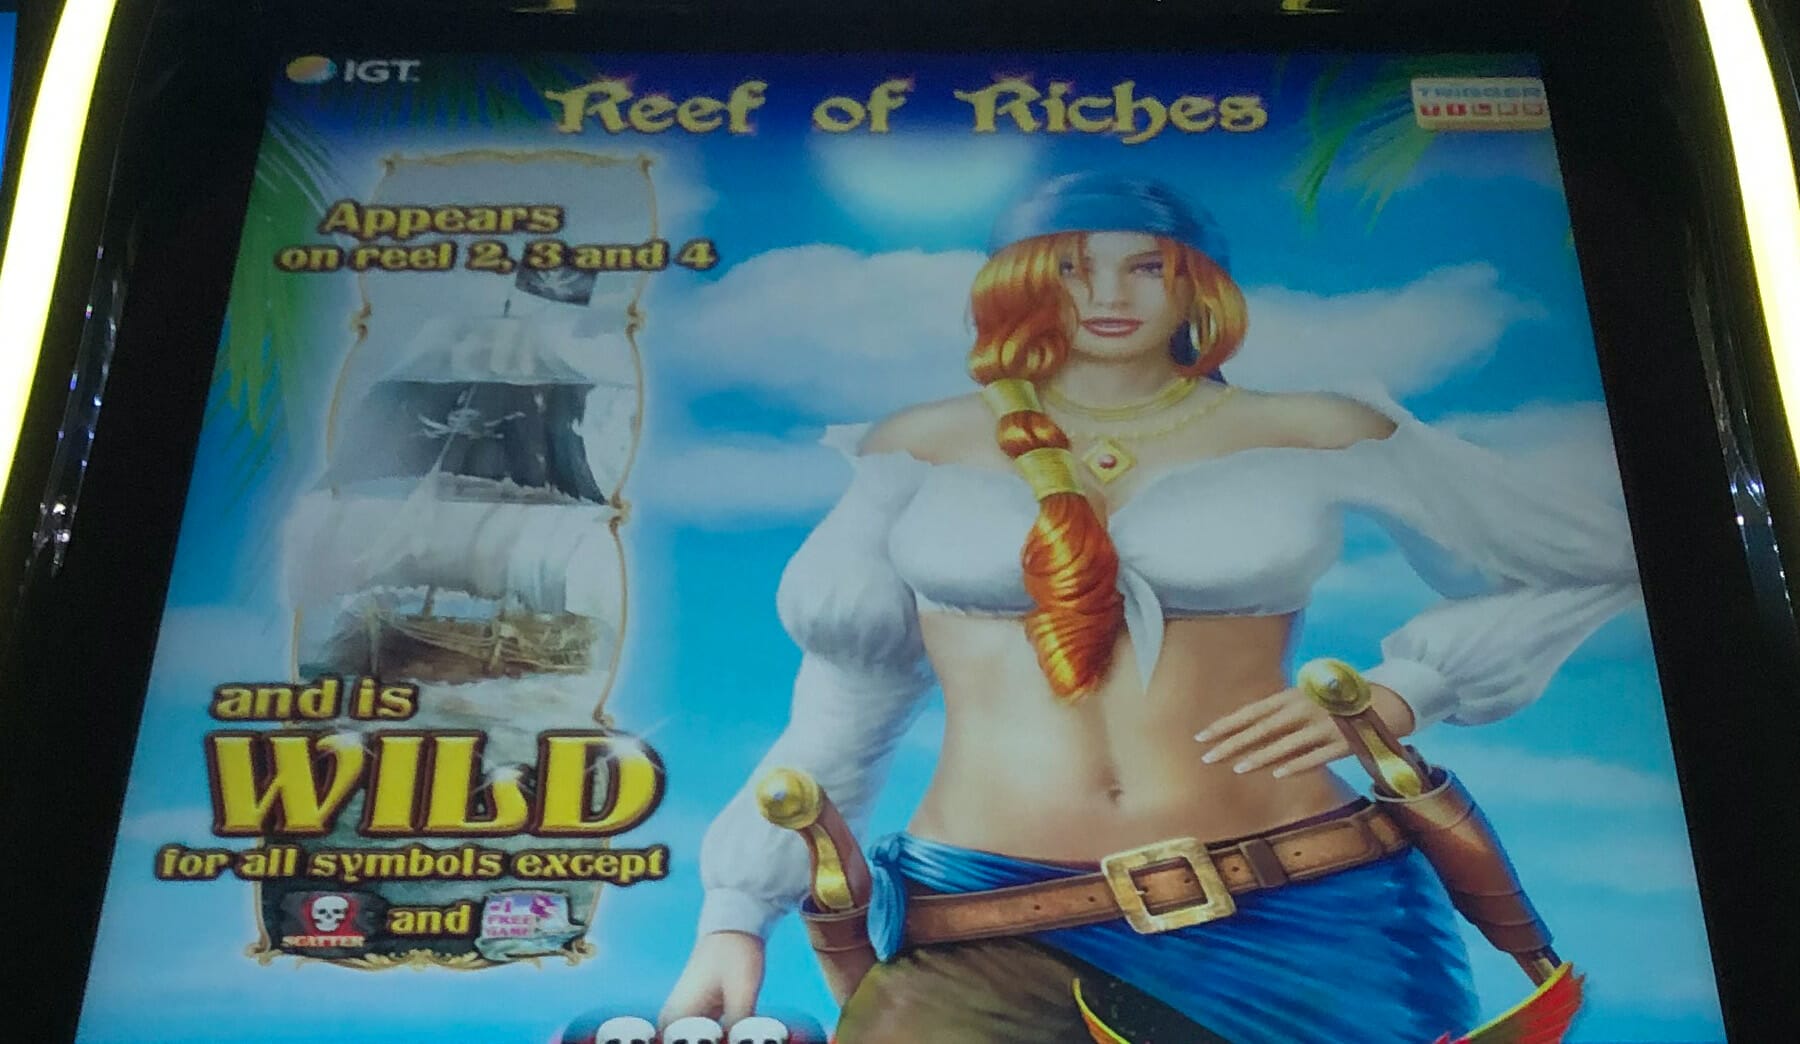 Reef of riches slot machine